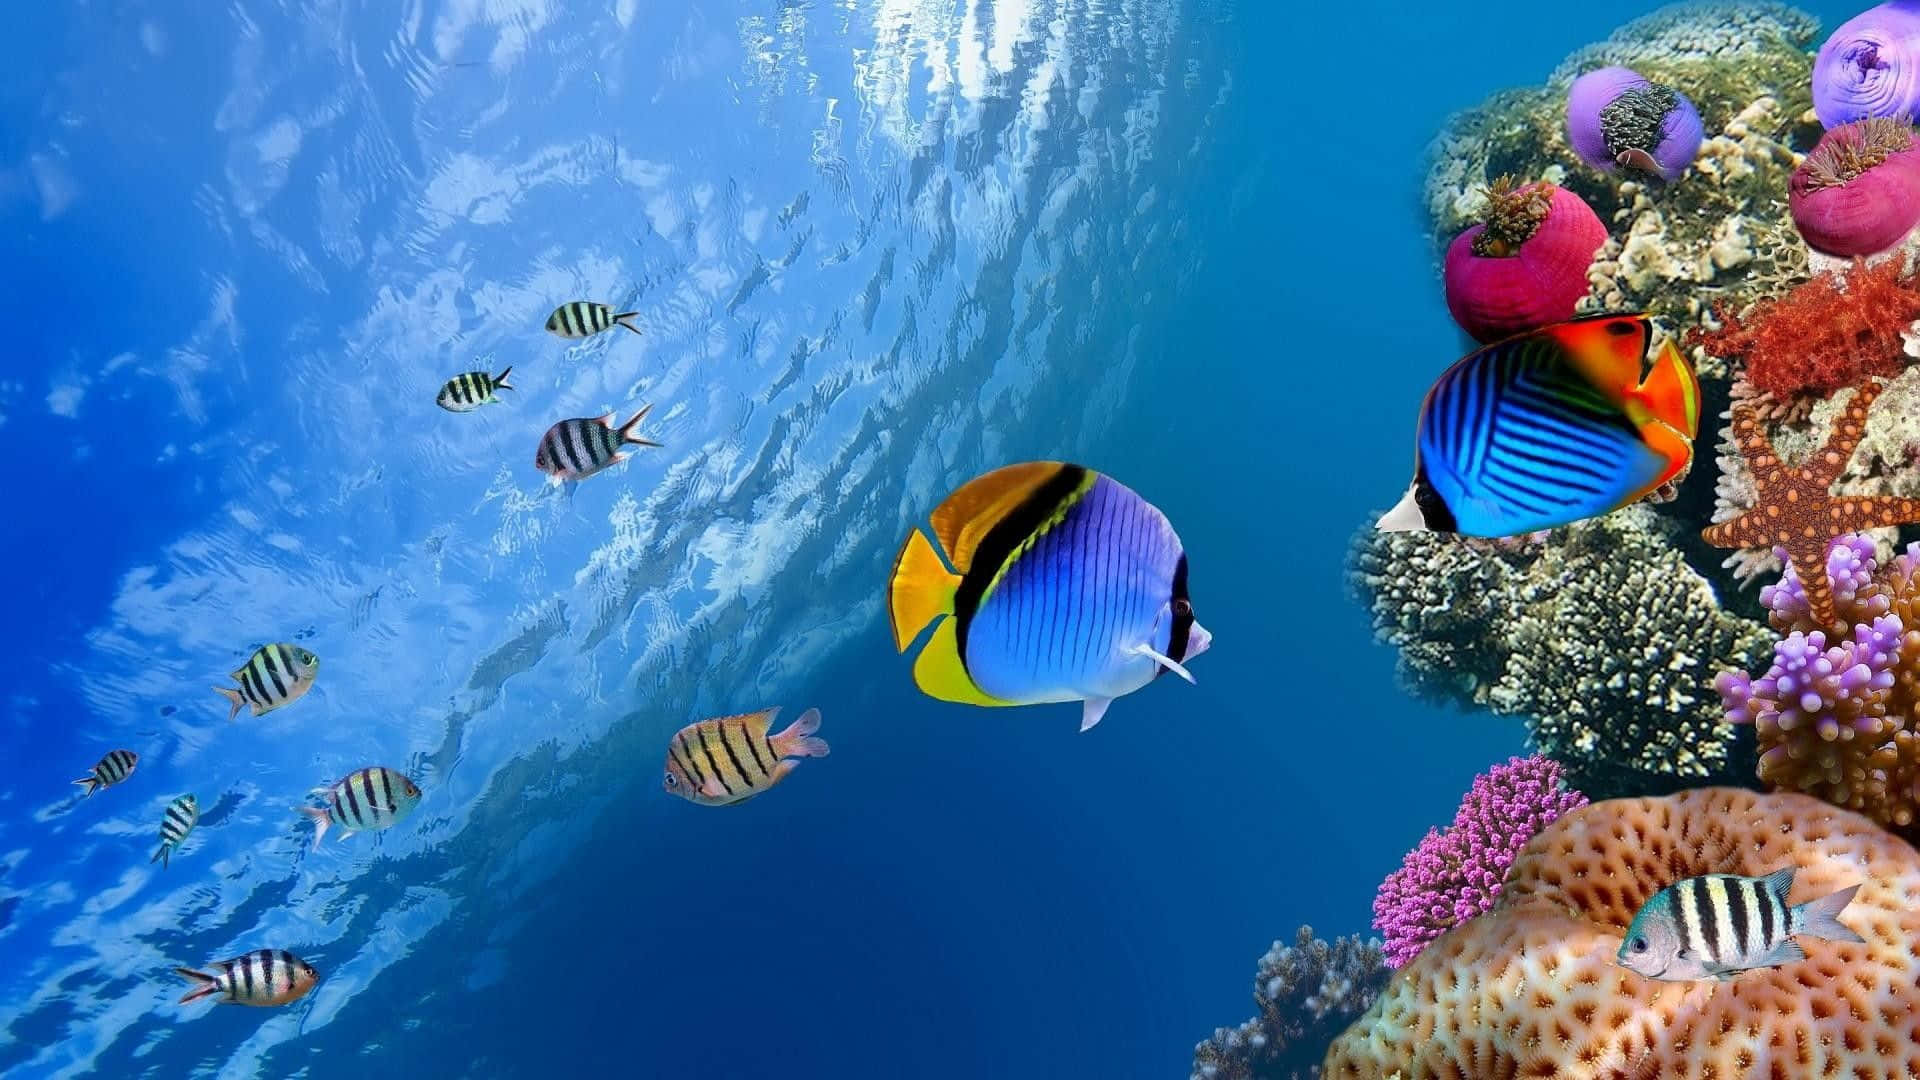 Download A Colorful Coral Reef With Many Fish Swimming Around ...